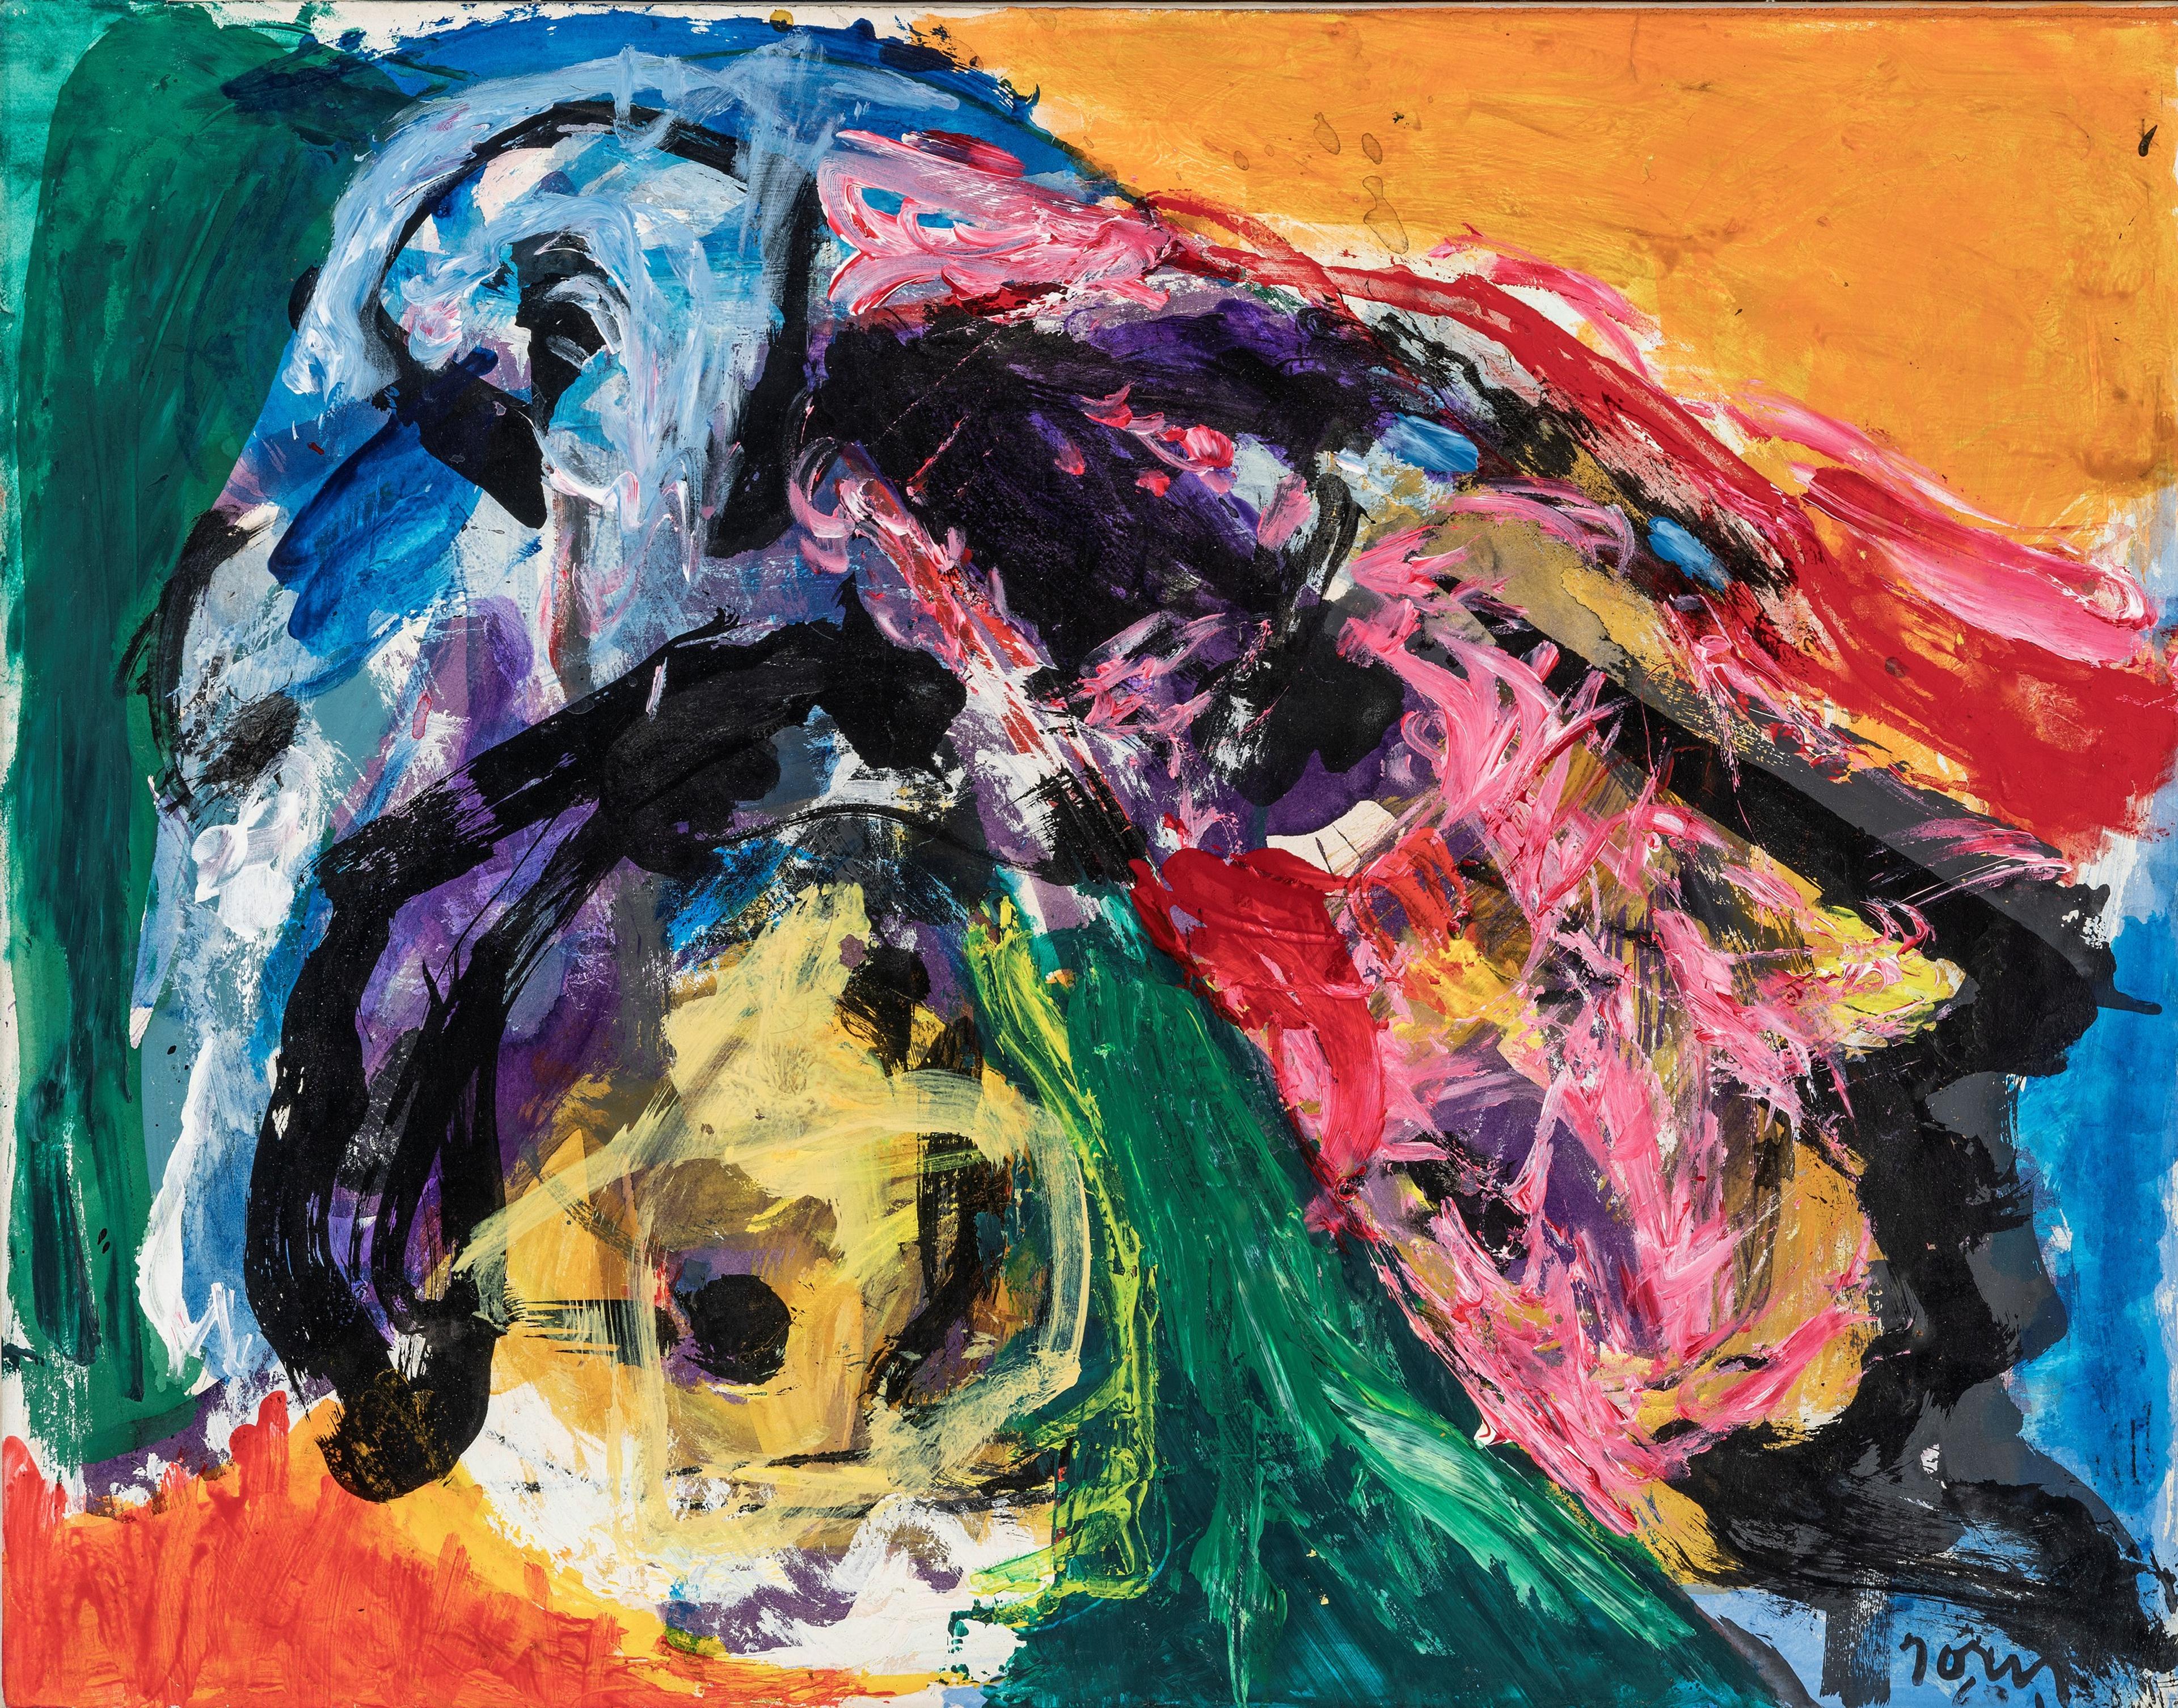 An abstract motif by Asger Jorn, in multiple colors.